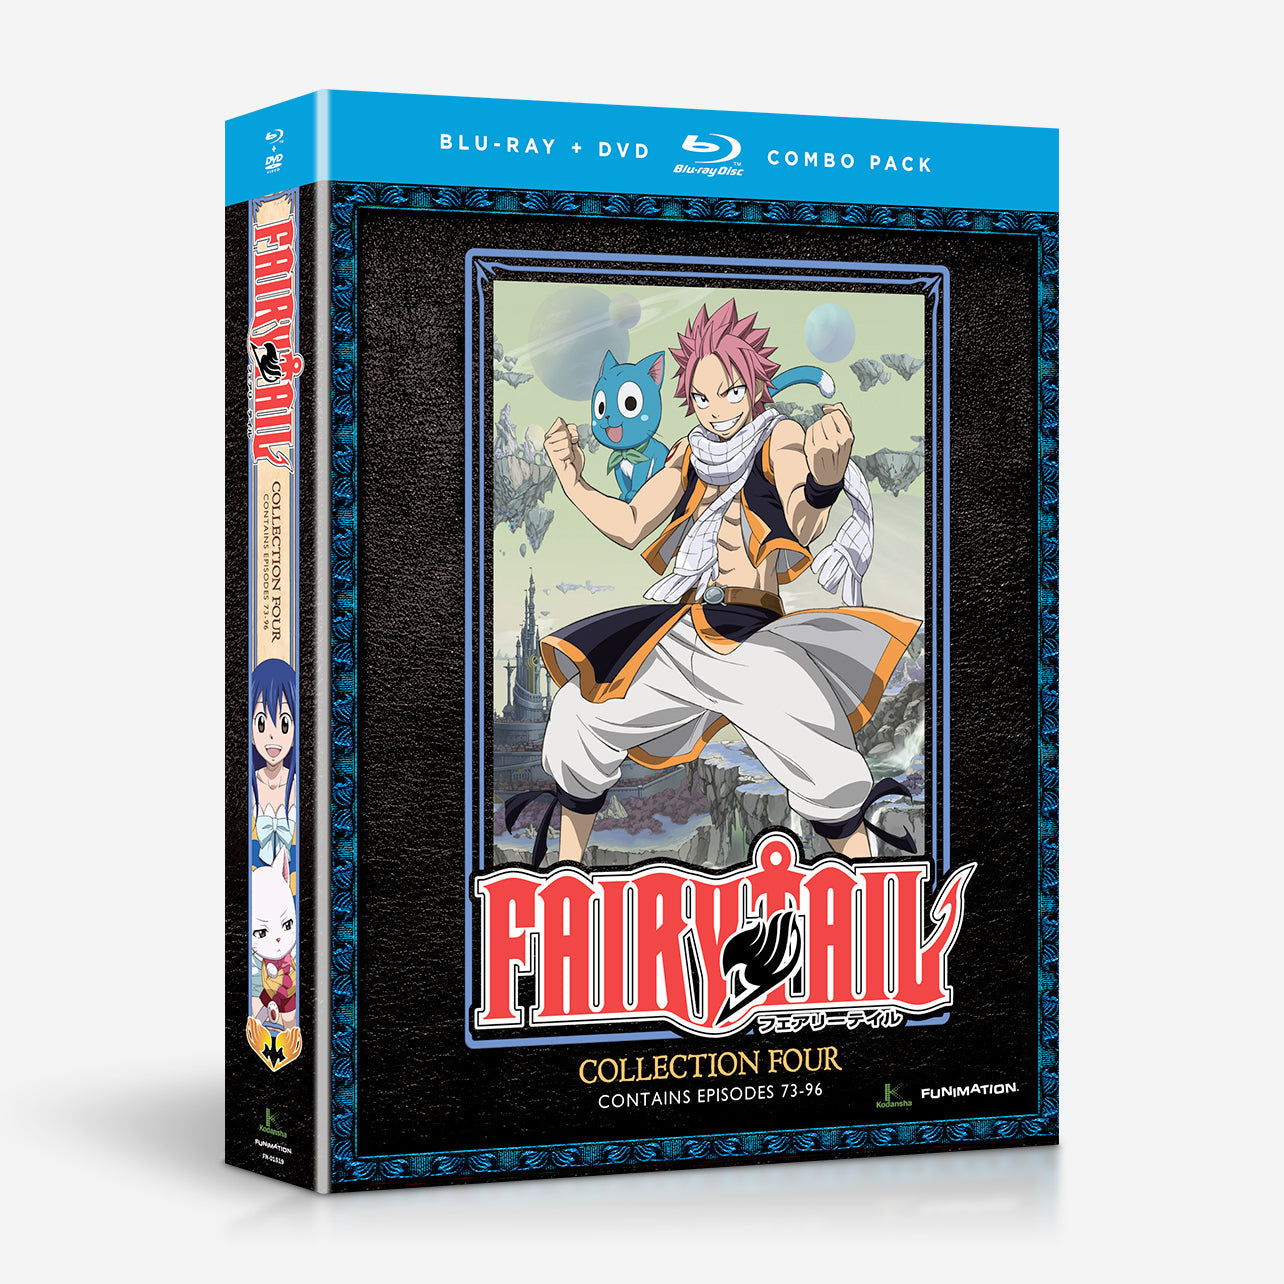 Fairy Tail - Collection 4 - Blu-ray + DVD image count 0